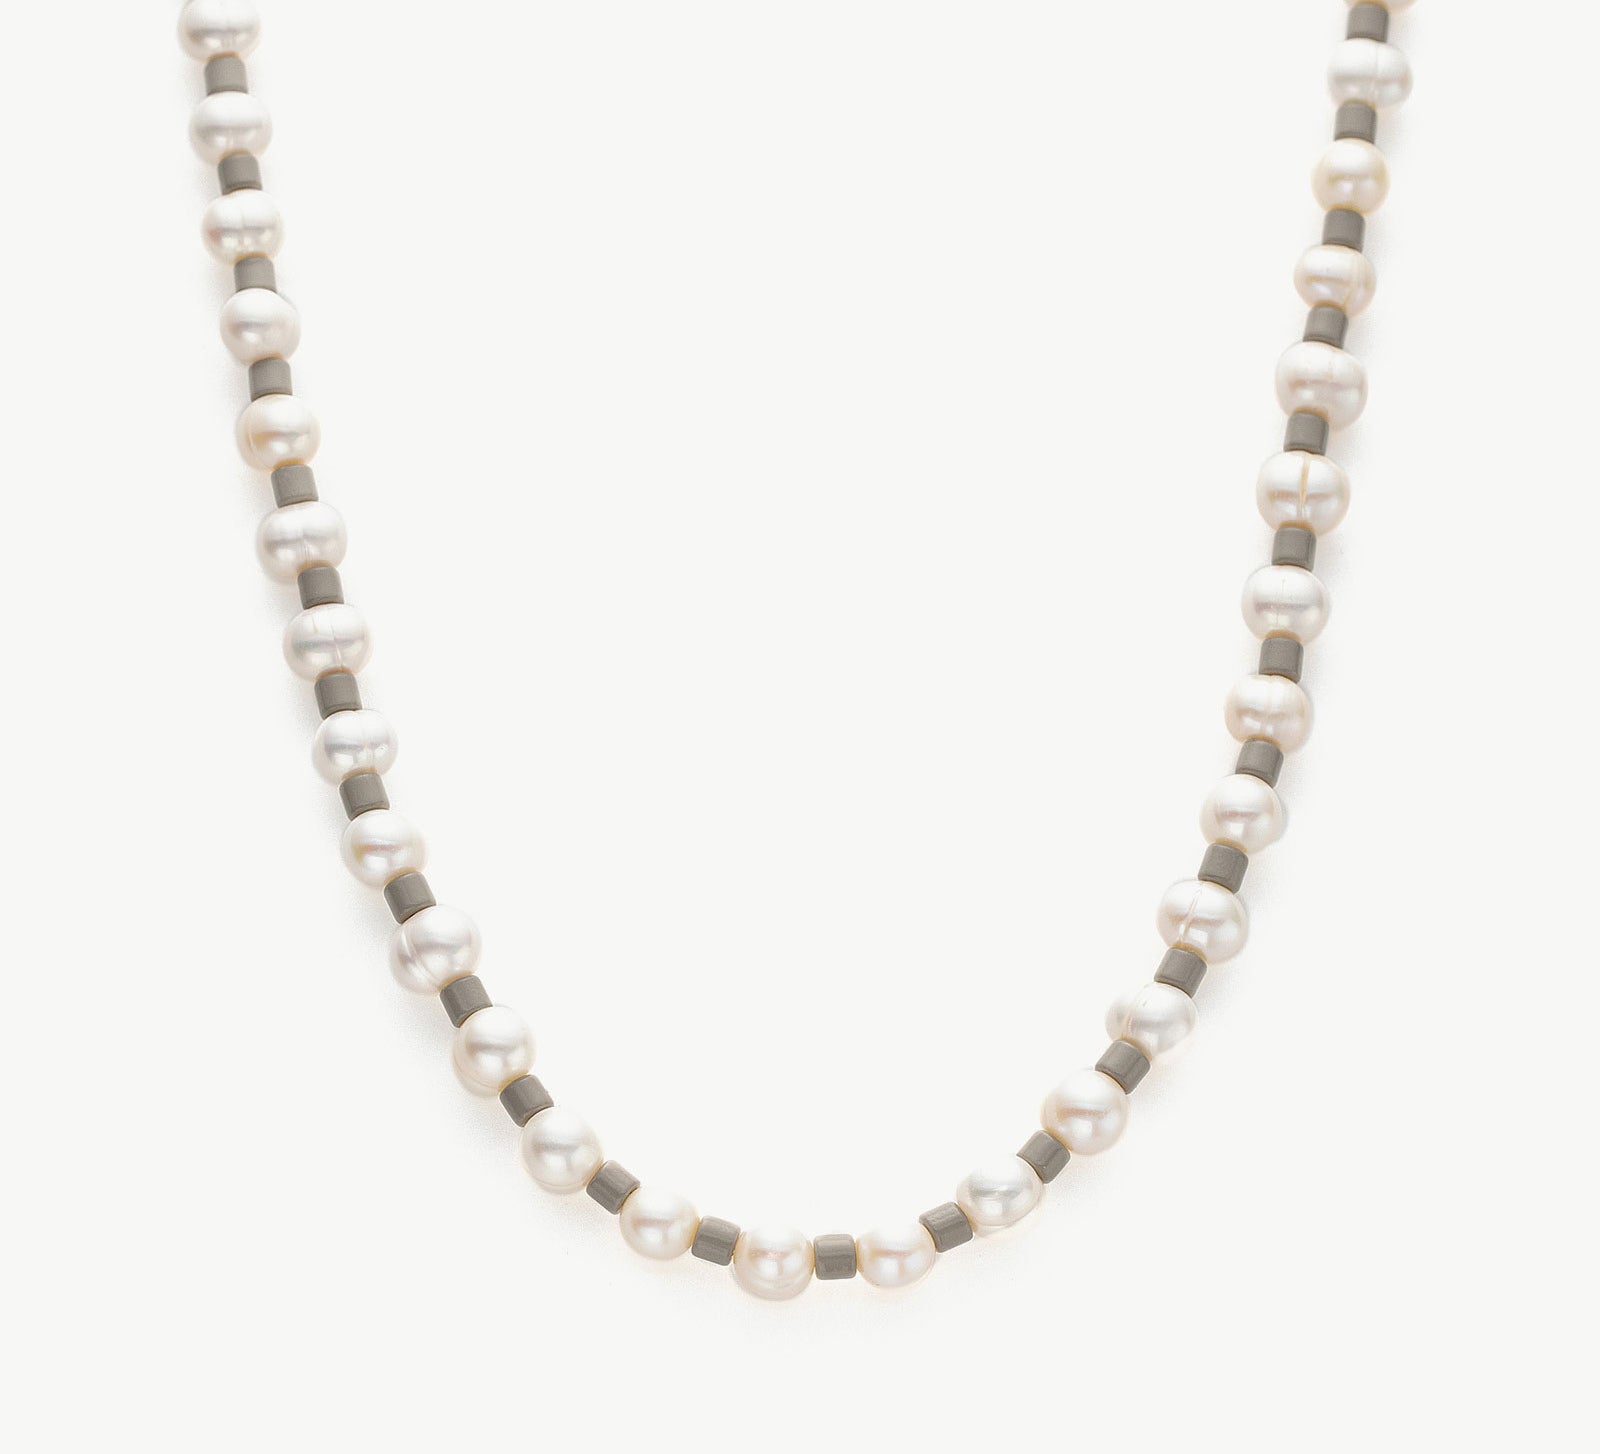 Pearl Beaded Necklace, radiating eternal pearl radiance, this necklace showcases a timeless strand of pearls, expressing enduring style and grace